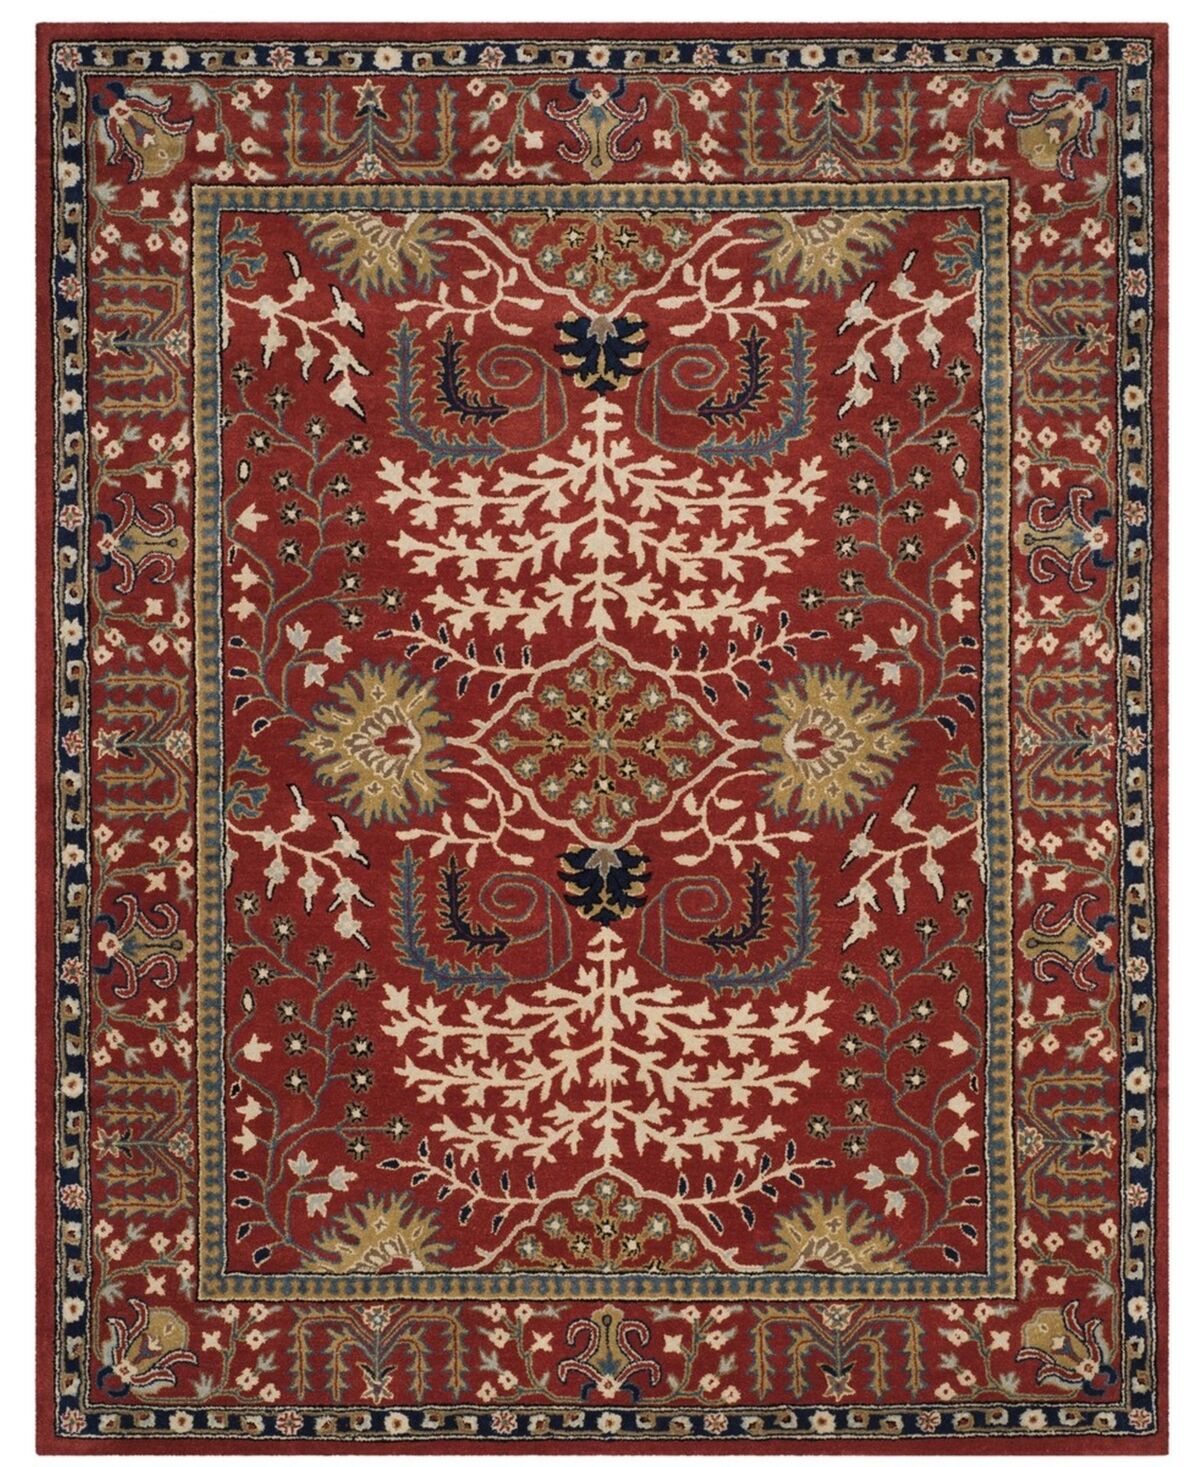 Safavieh Antiquity At64 Red and Multi 8' x 10' Area Rug - Red